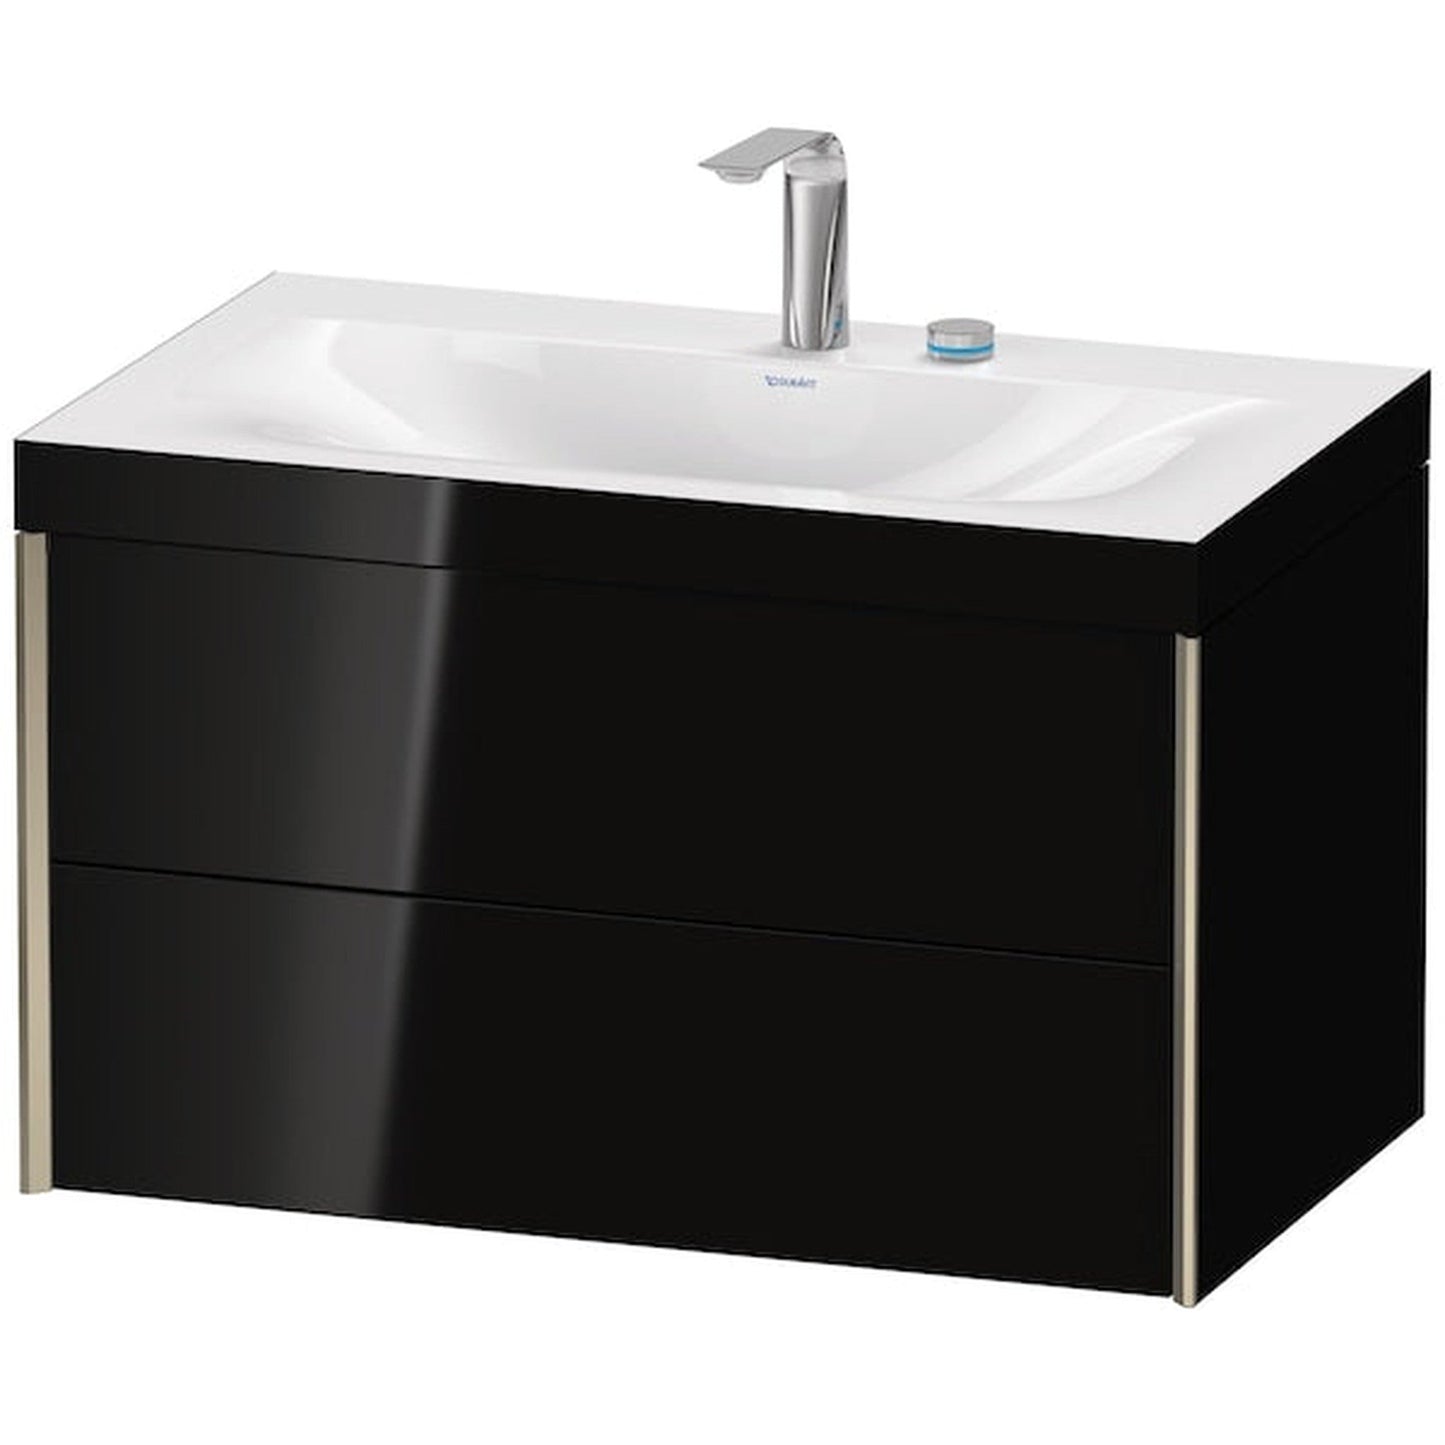 Duravit Xviu 31" x 20" x 19" Two Drawer C-Bonded Wall-Mount Vanity Kit With Two Tap Holes, Black (XV4615EB140C)